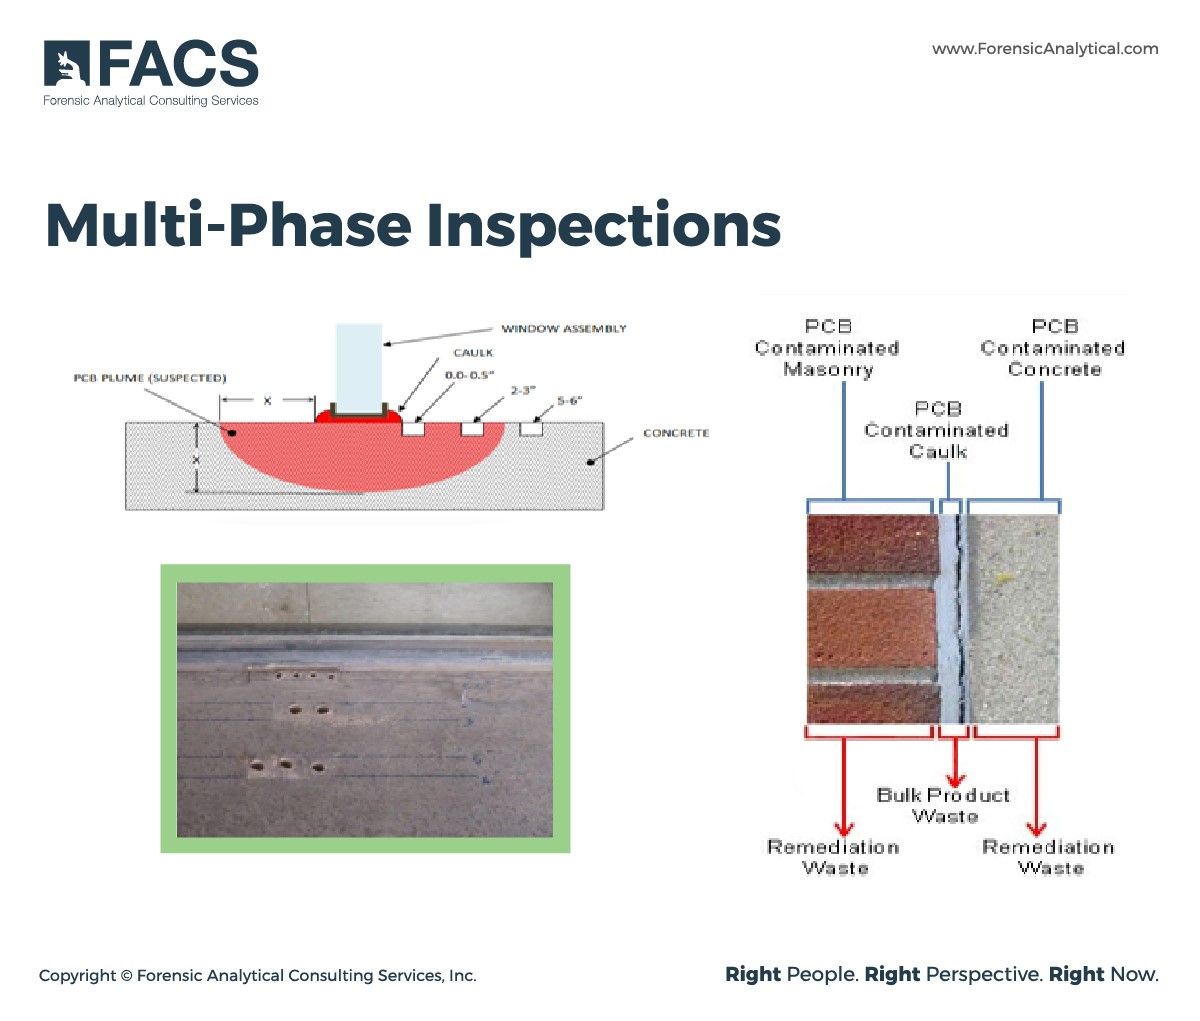 Multi-Phase Inspections